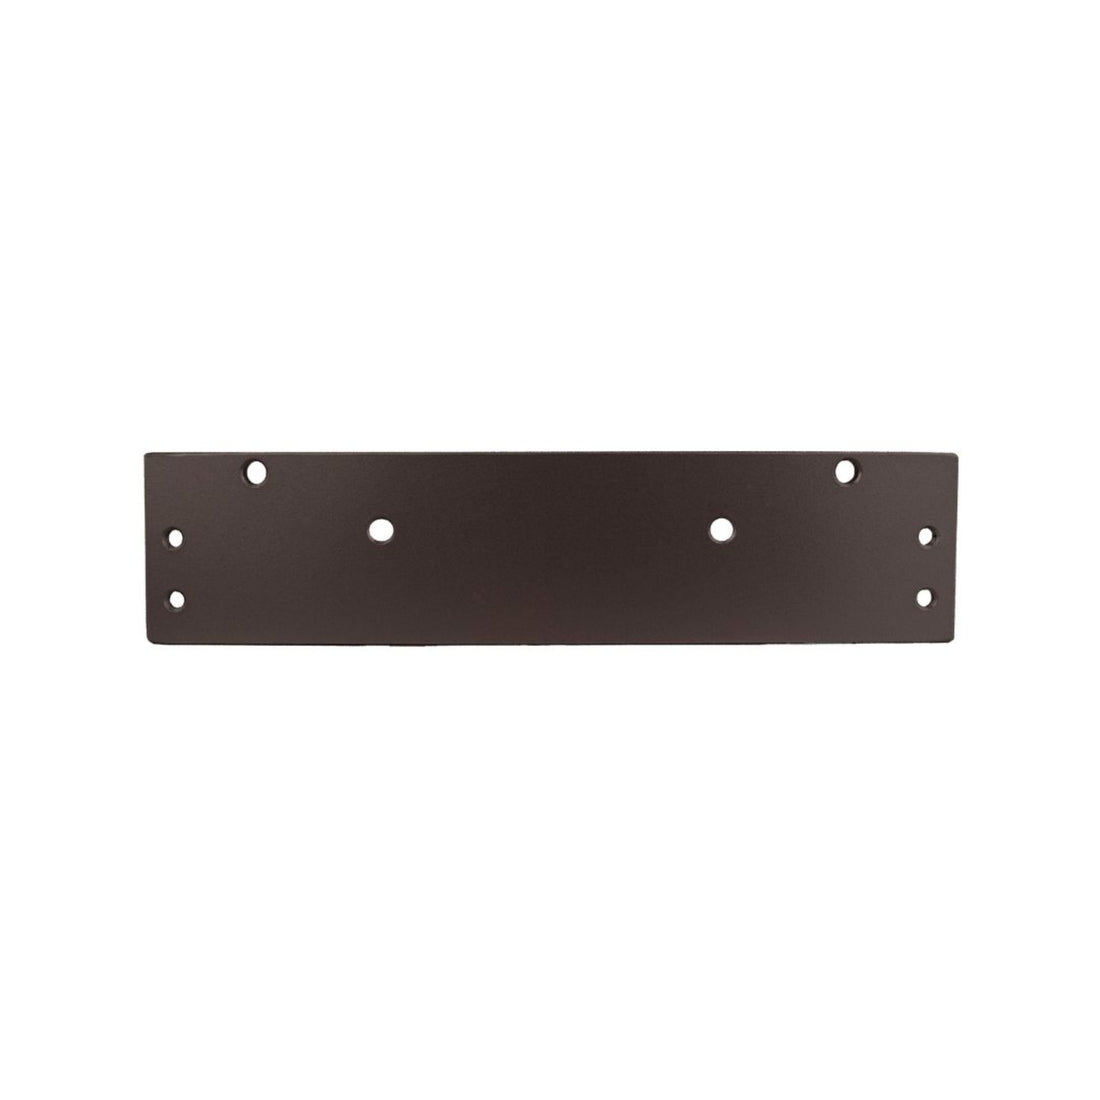 Standard Drop Plate for 600 Series -  Pro-Edge HD